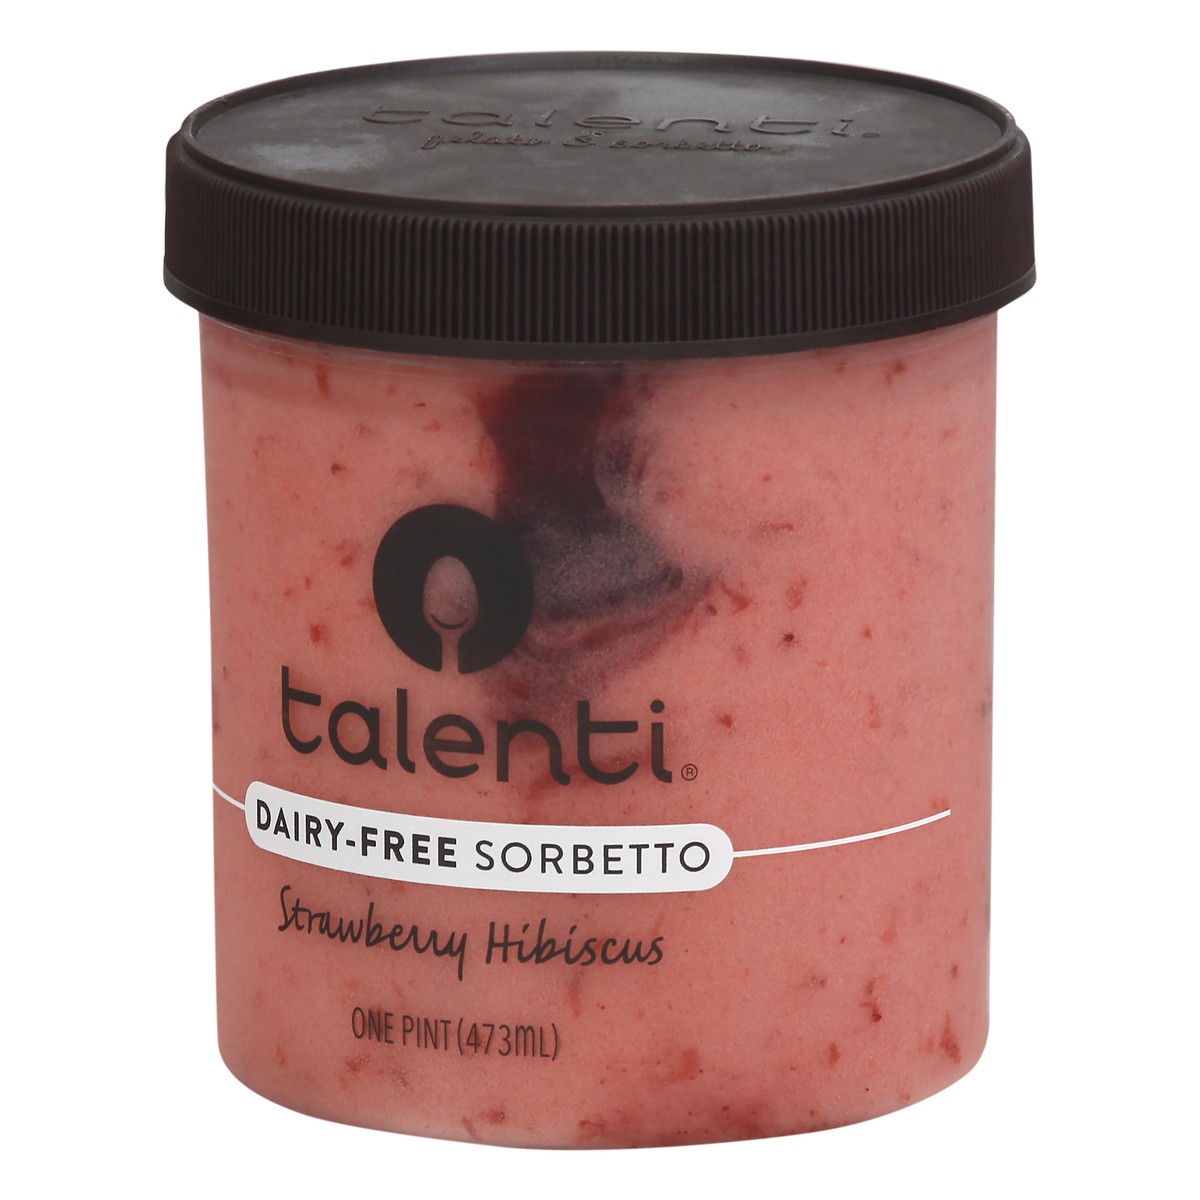 slide 12 of 12, Talenti Dairy-Free Sorbetto Strawberry Hibiscus, 1 pint, 1 pint